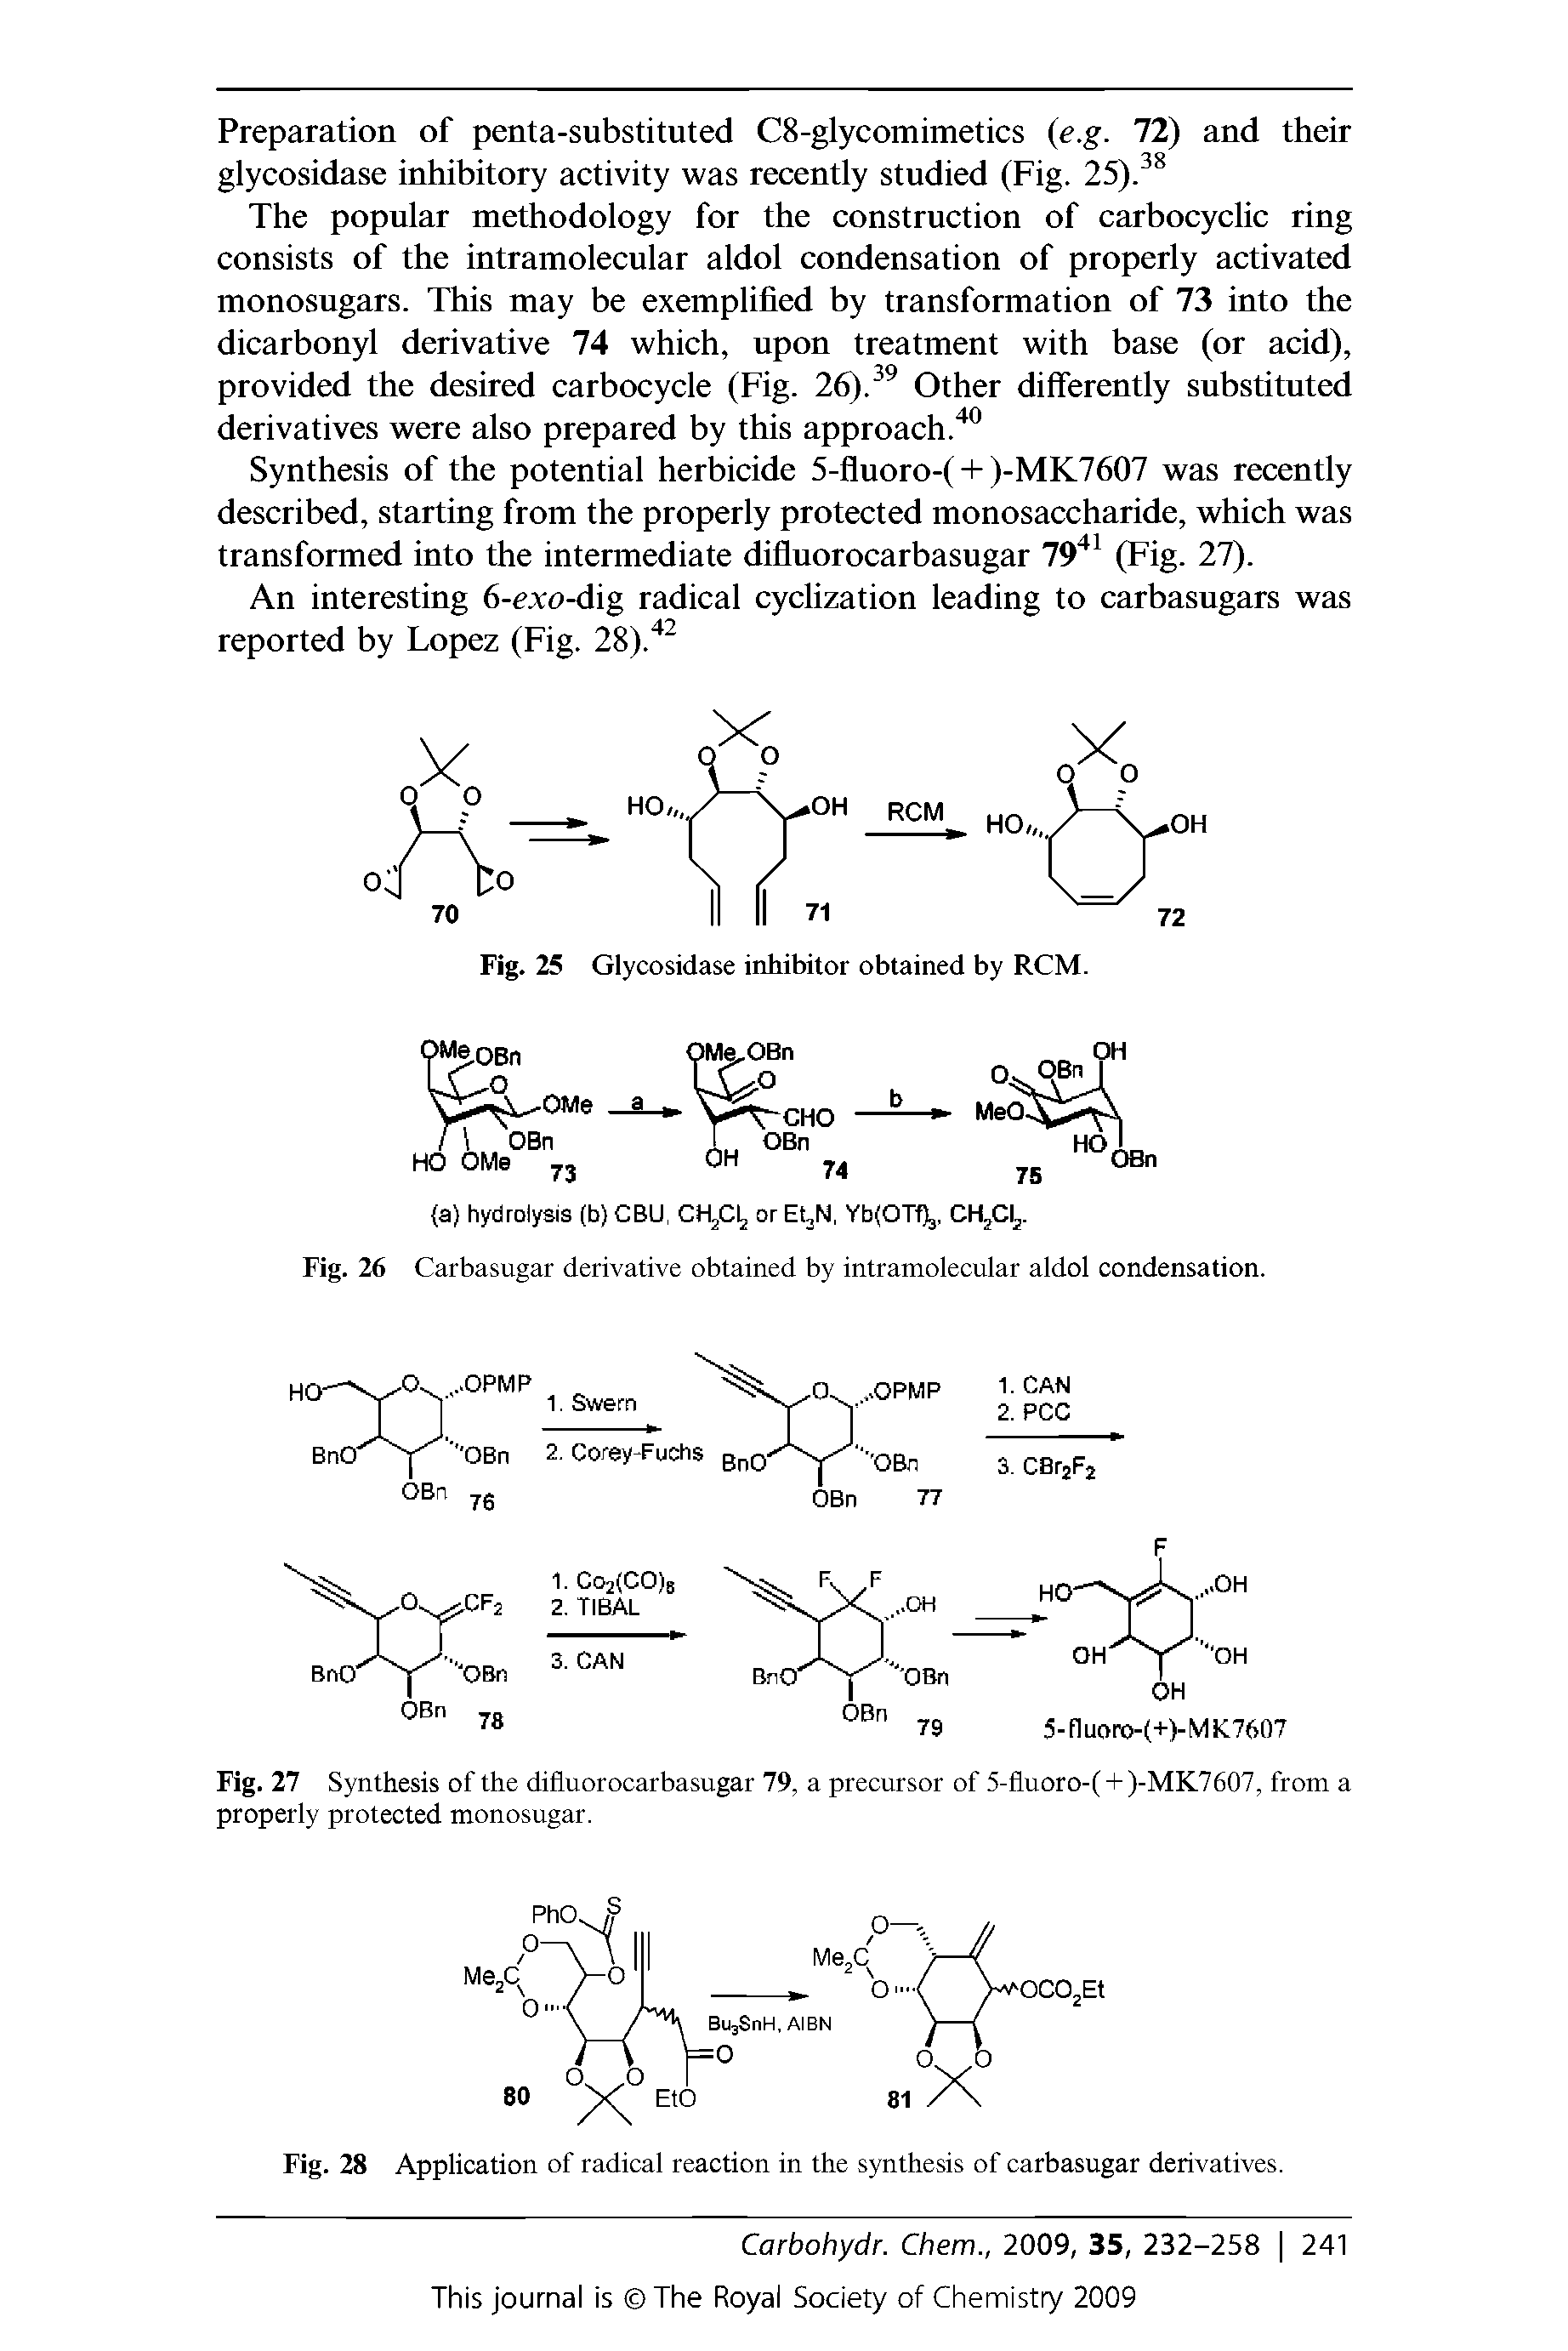 Fig. 28 Application of radical reaction in the synthesis of carbasugar derivatives.